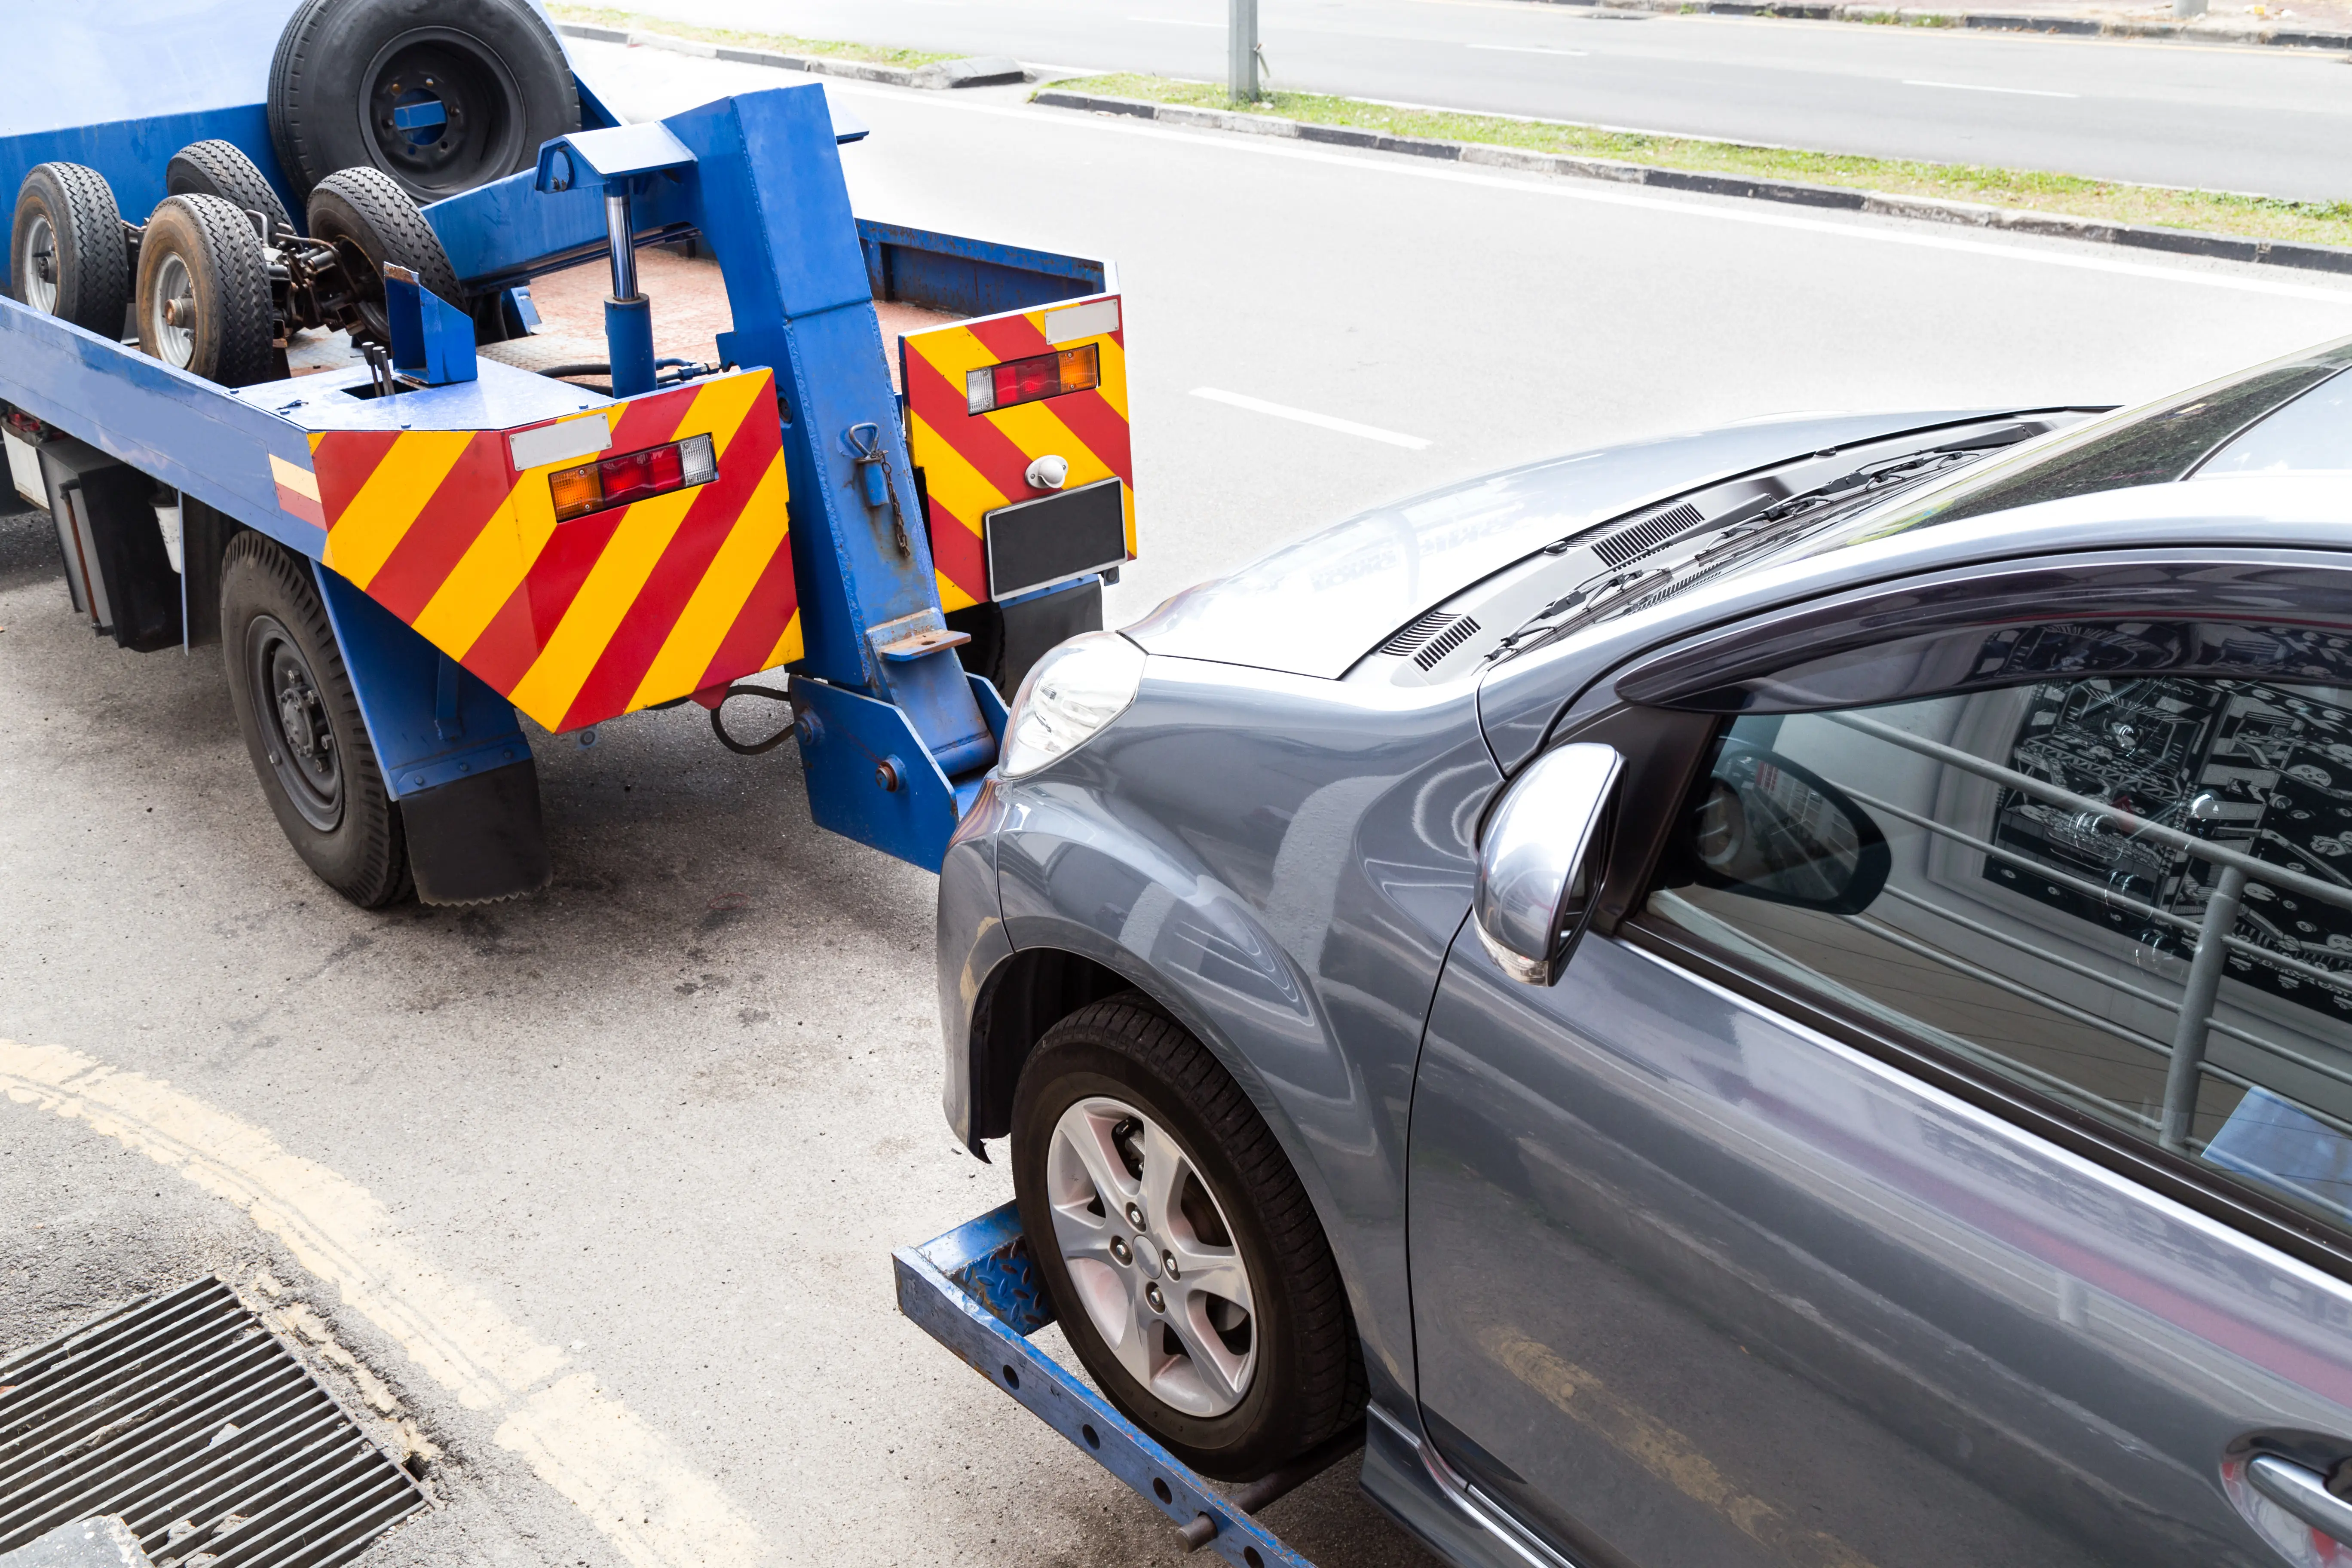 Exclusive-Towing-Service-Leads--in-Columbus-Ohio-Exclusive-Towing-Service-Leads-15164-image